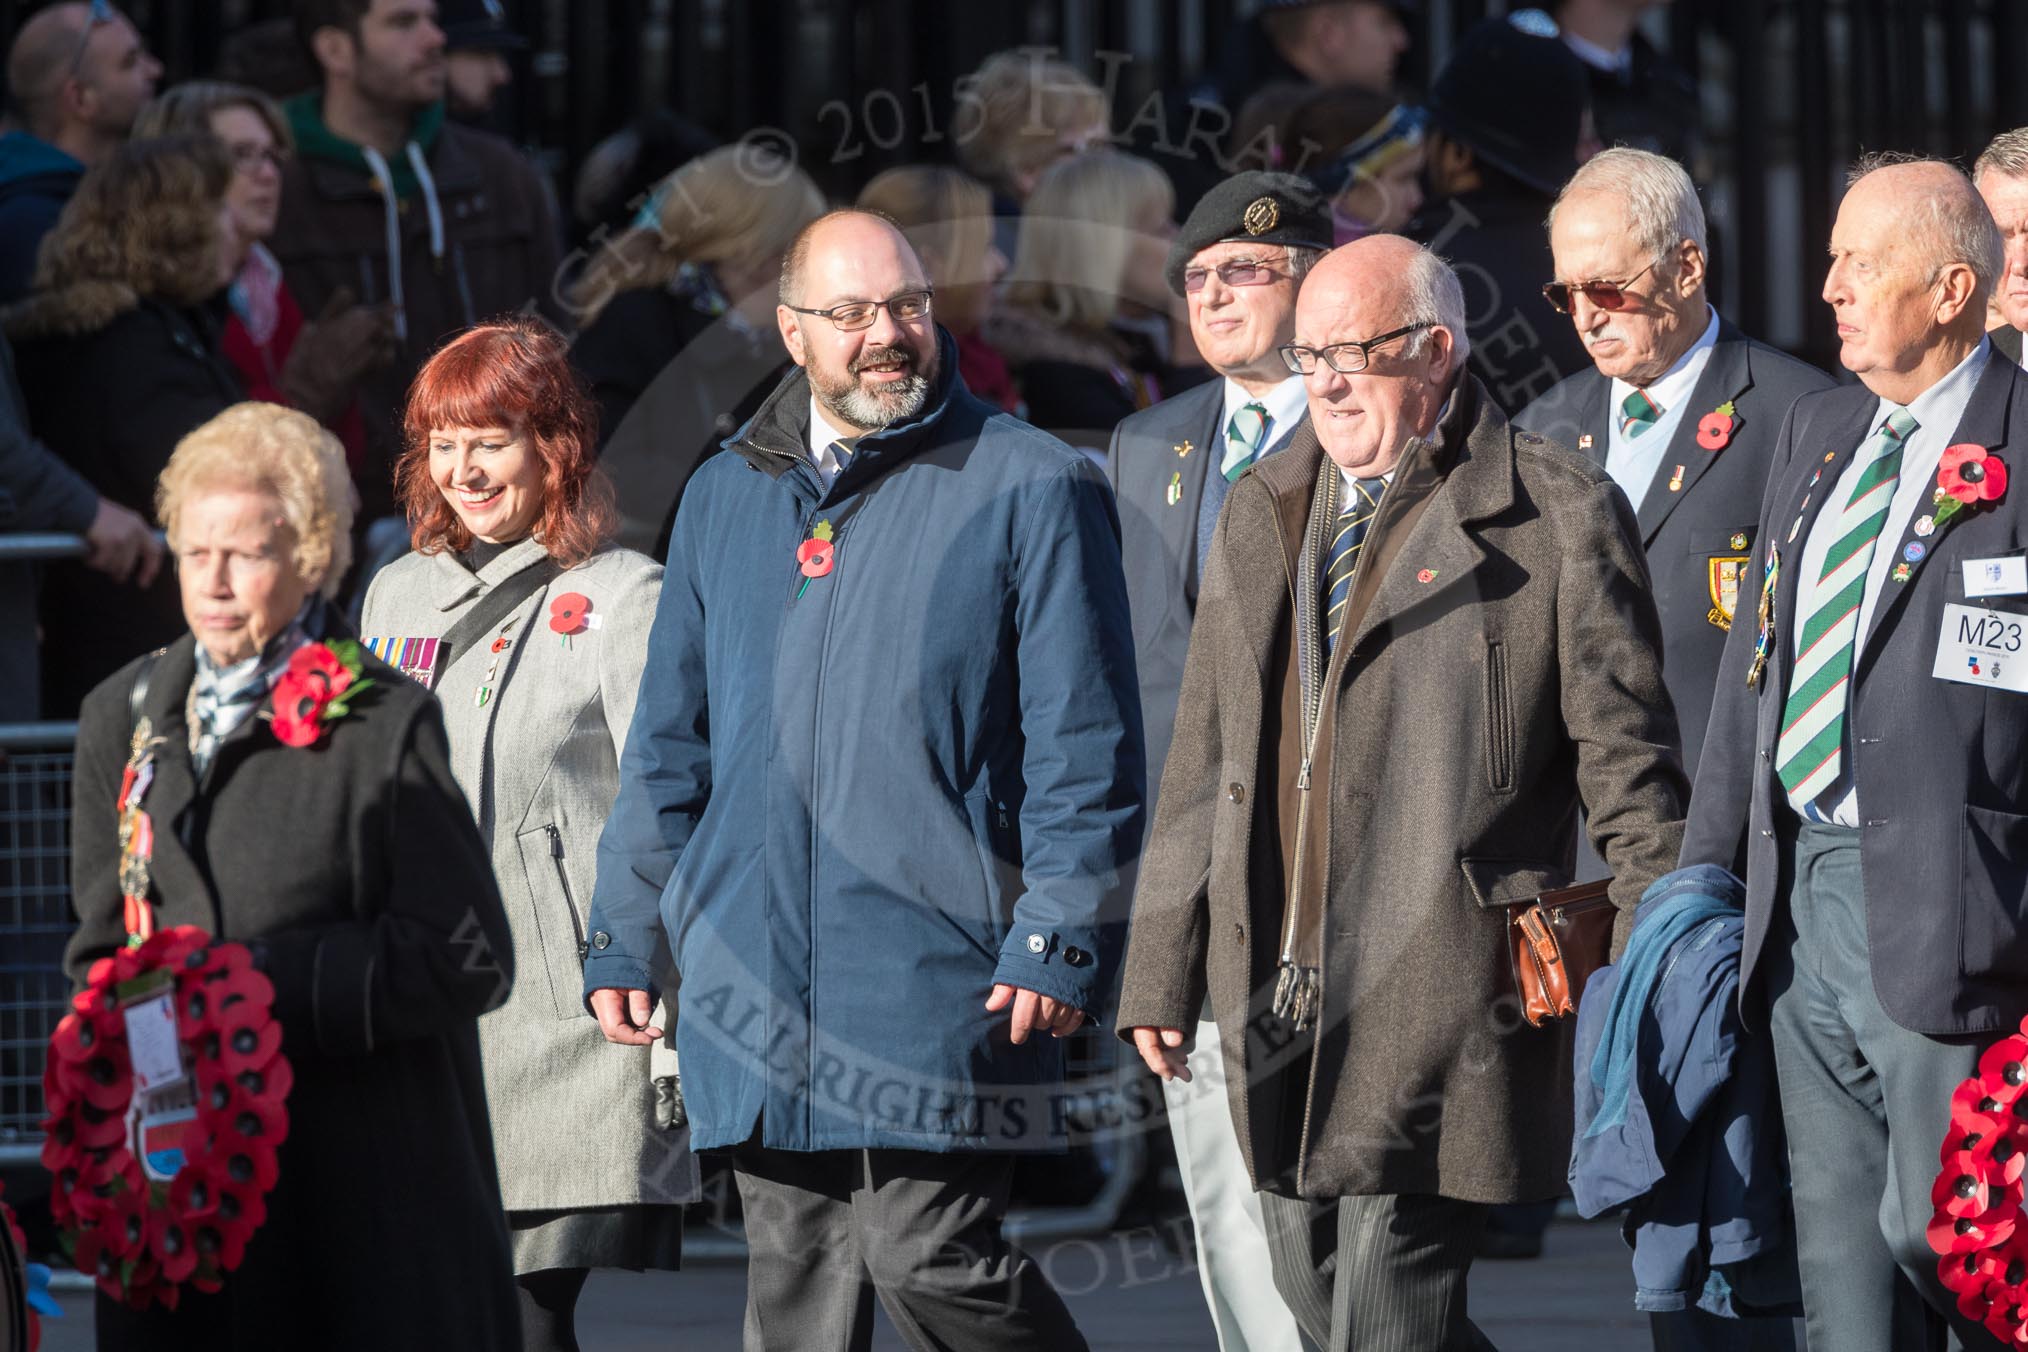 March Past, Remembrance Sunday at the Cenotaph 2016: M23 Gallipoli Association.
Cenotaph, Whitehall, London SW1,
London,
Greater London,
United Kingdom,
on 13 November 2016 at 13:16, image #2688